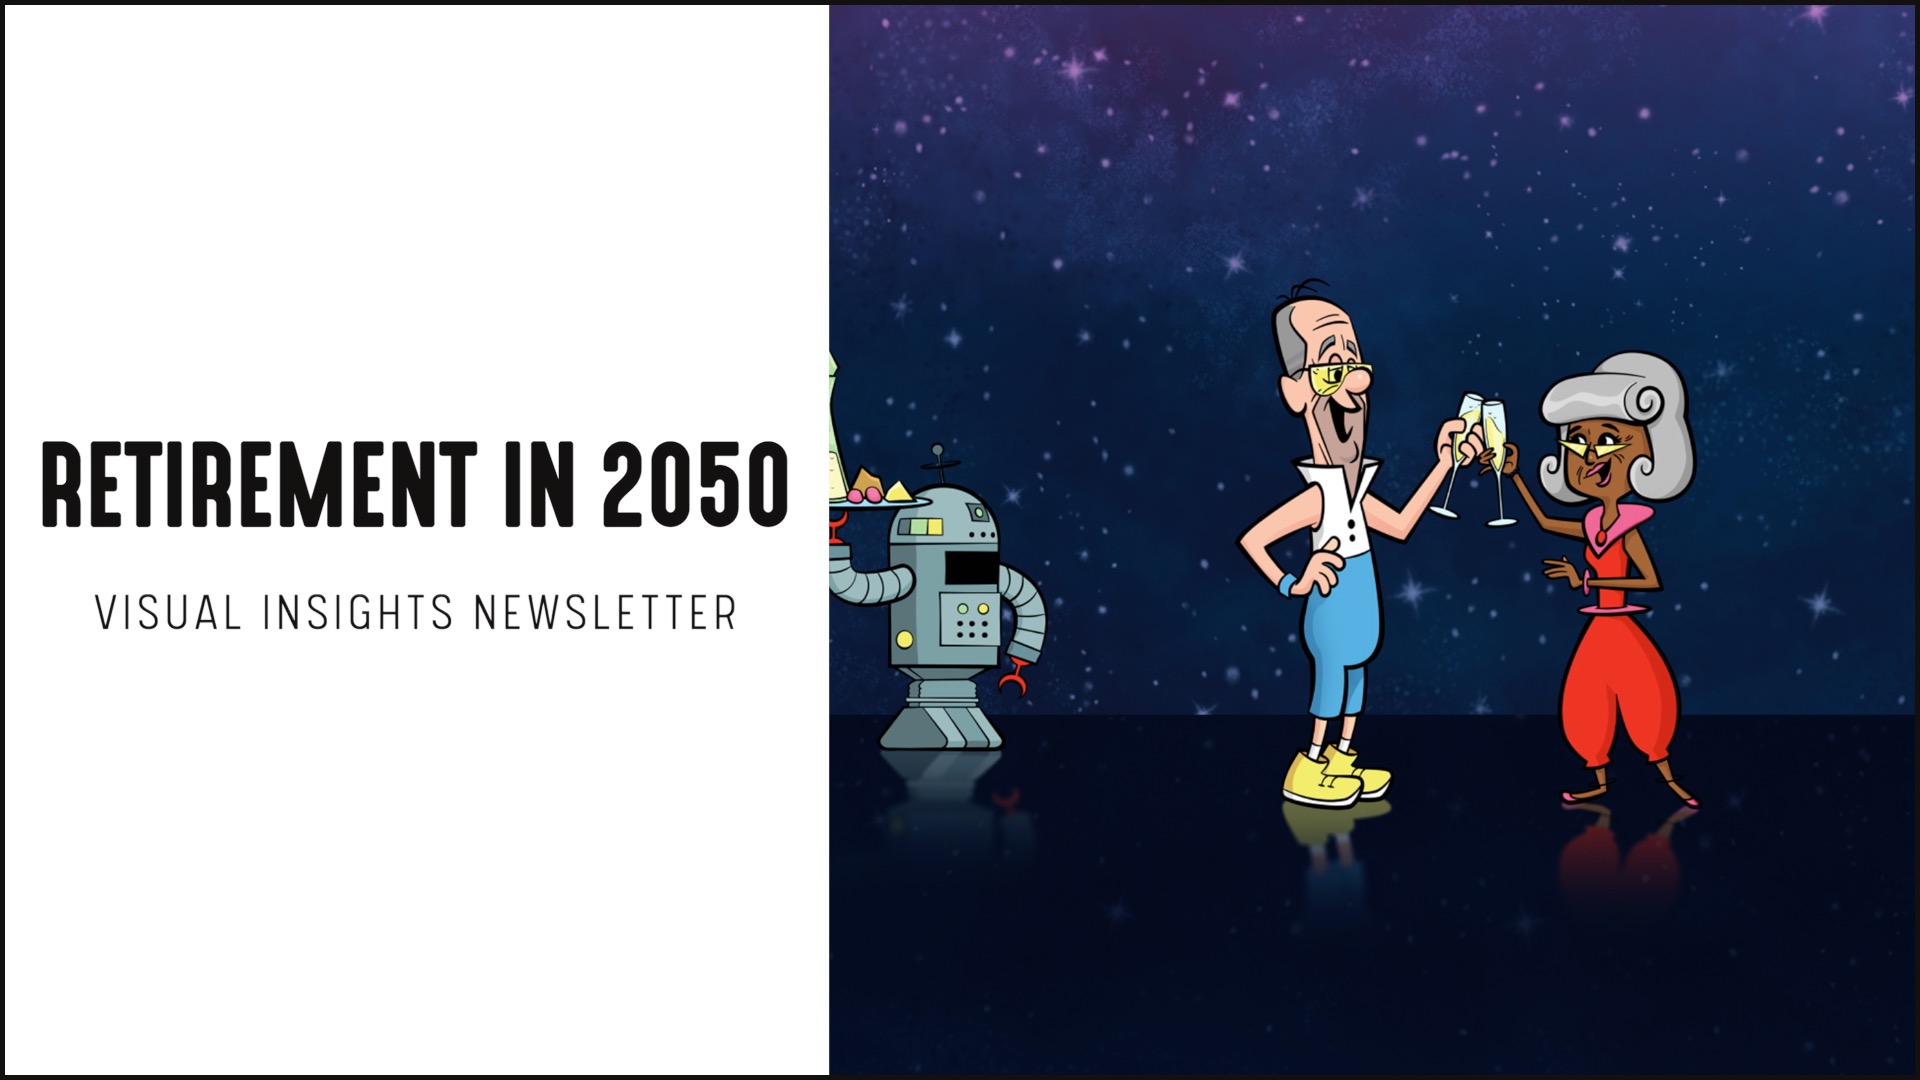 [NEW] Retirement in 2050 Visual Insights Newsletter